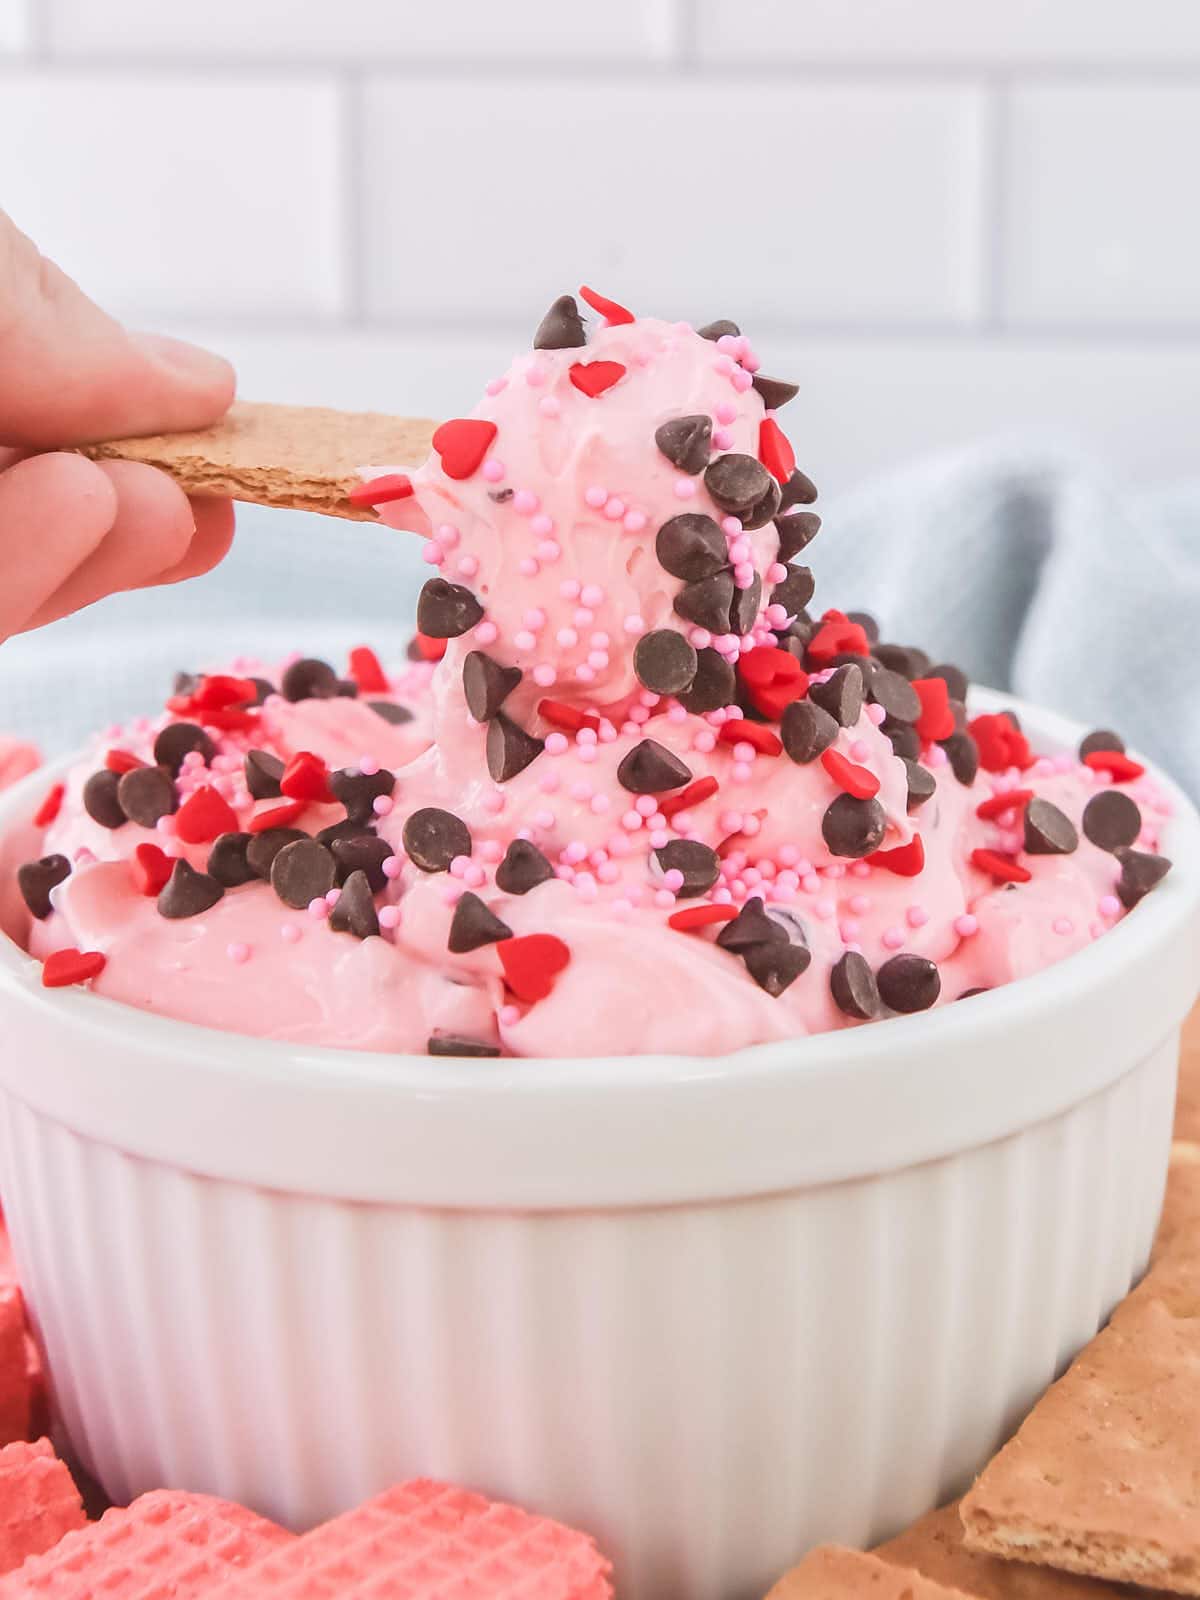 A person is scooping a pink dip out of a bowl.